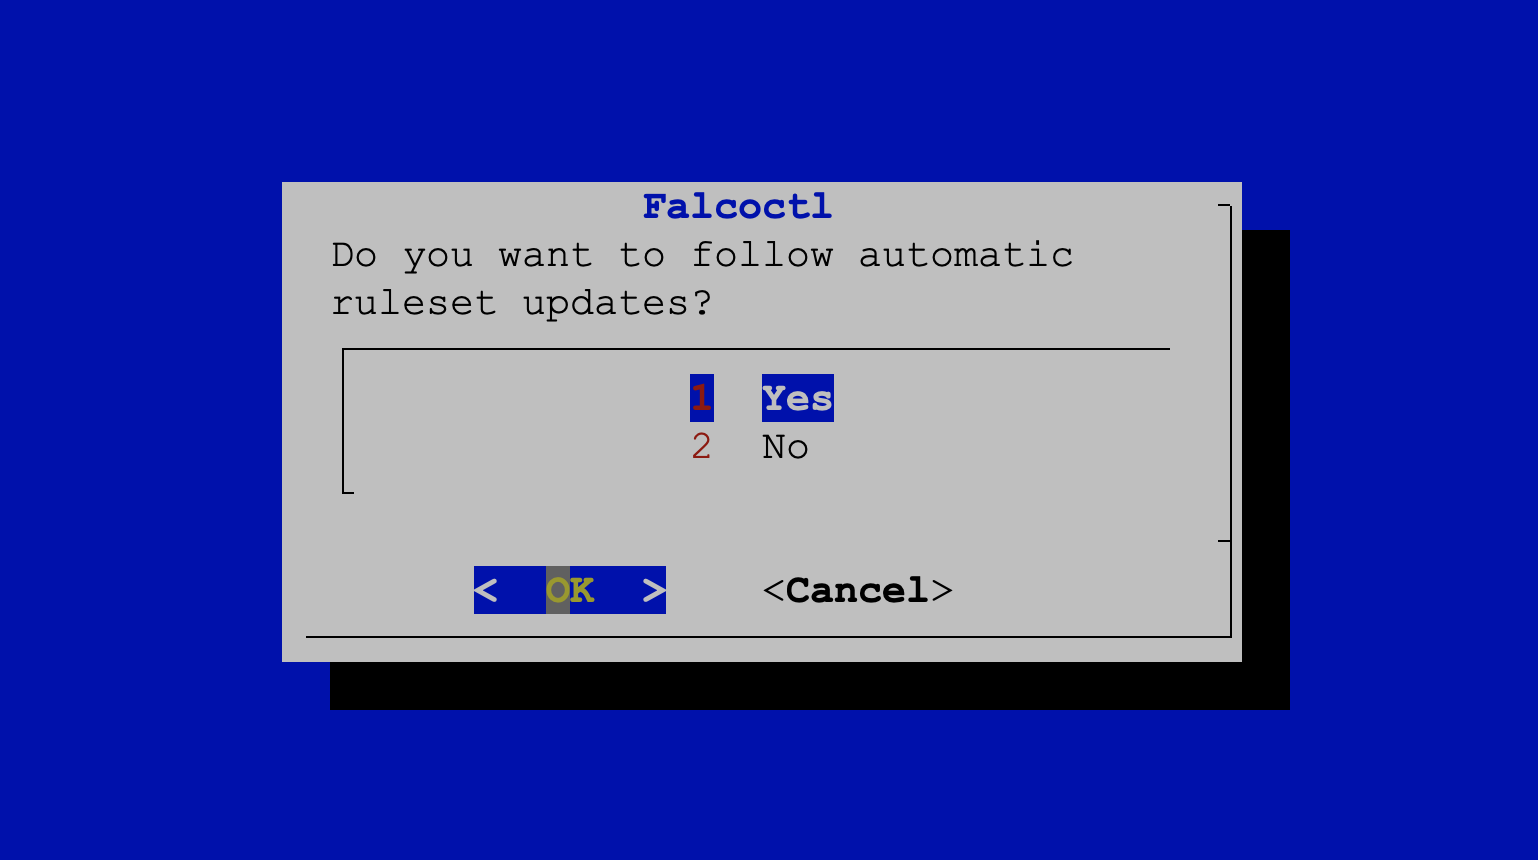 Dialog window - Choose the follow automatic ruleset updates